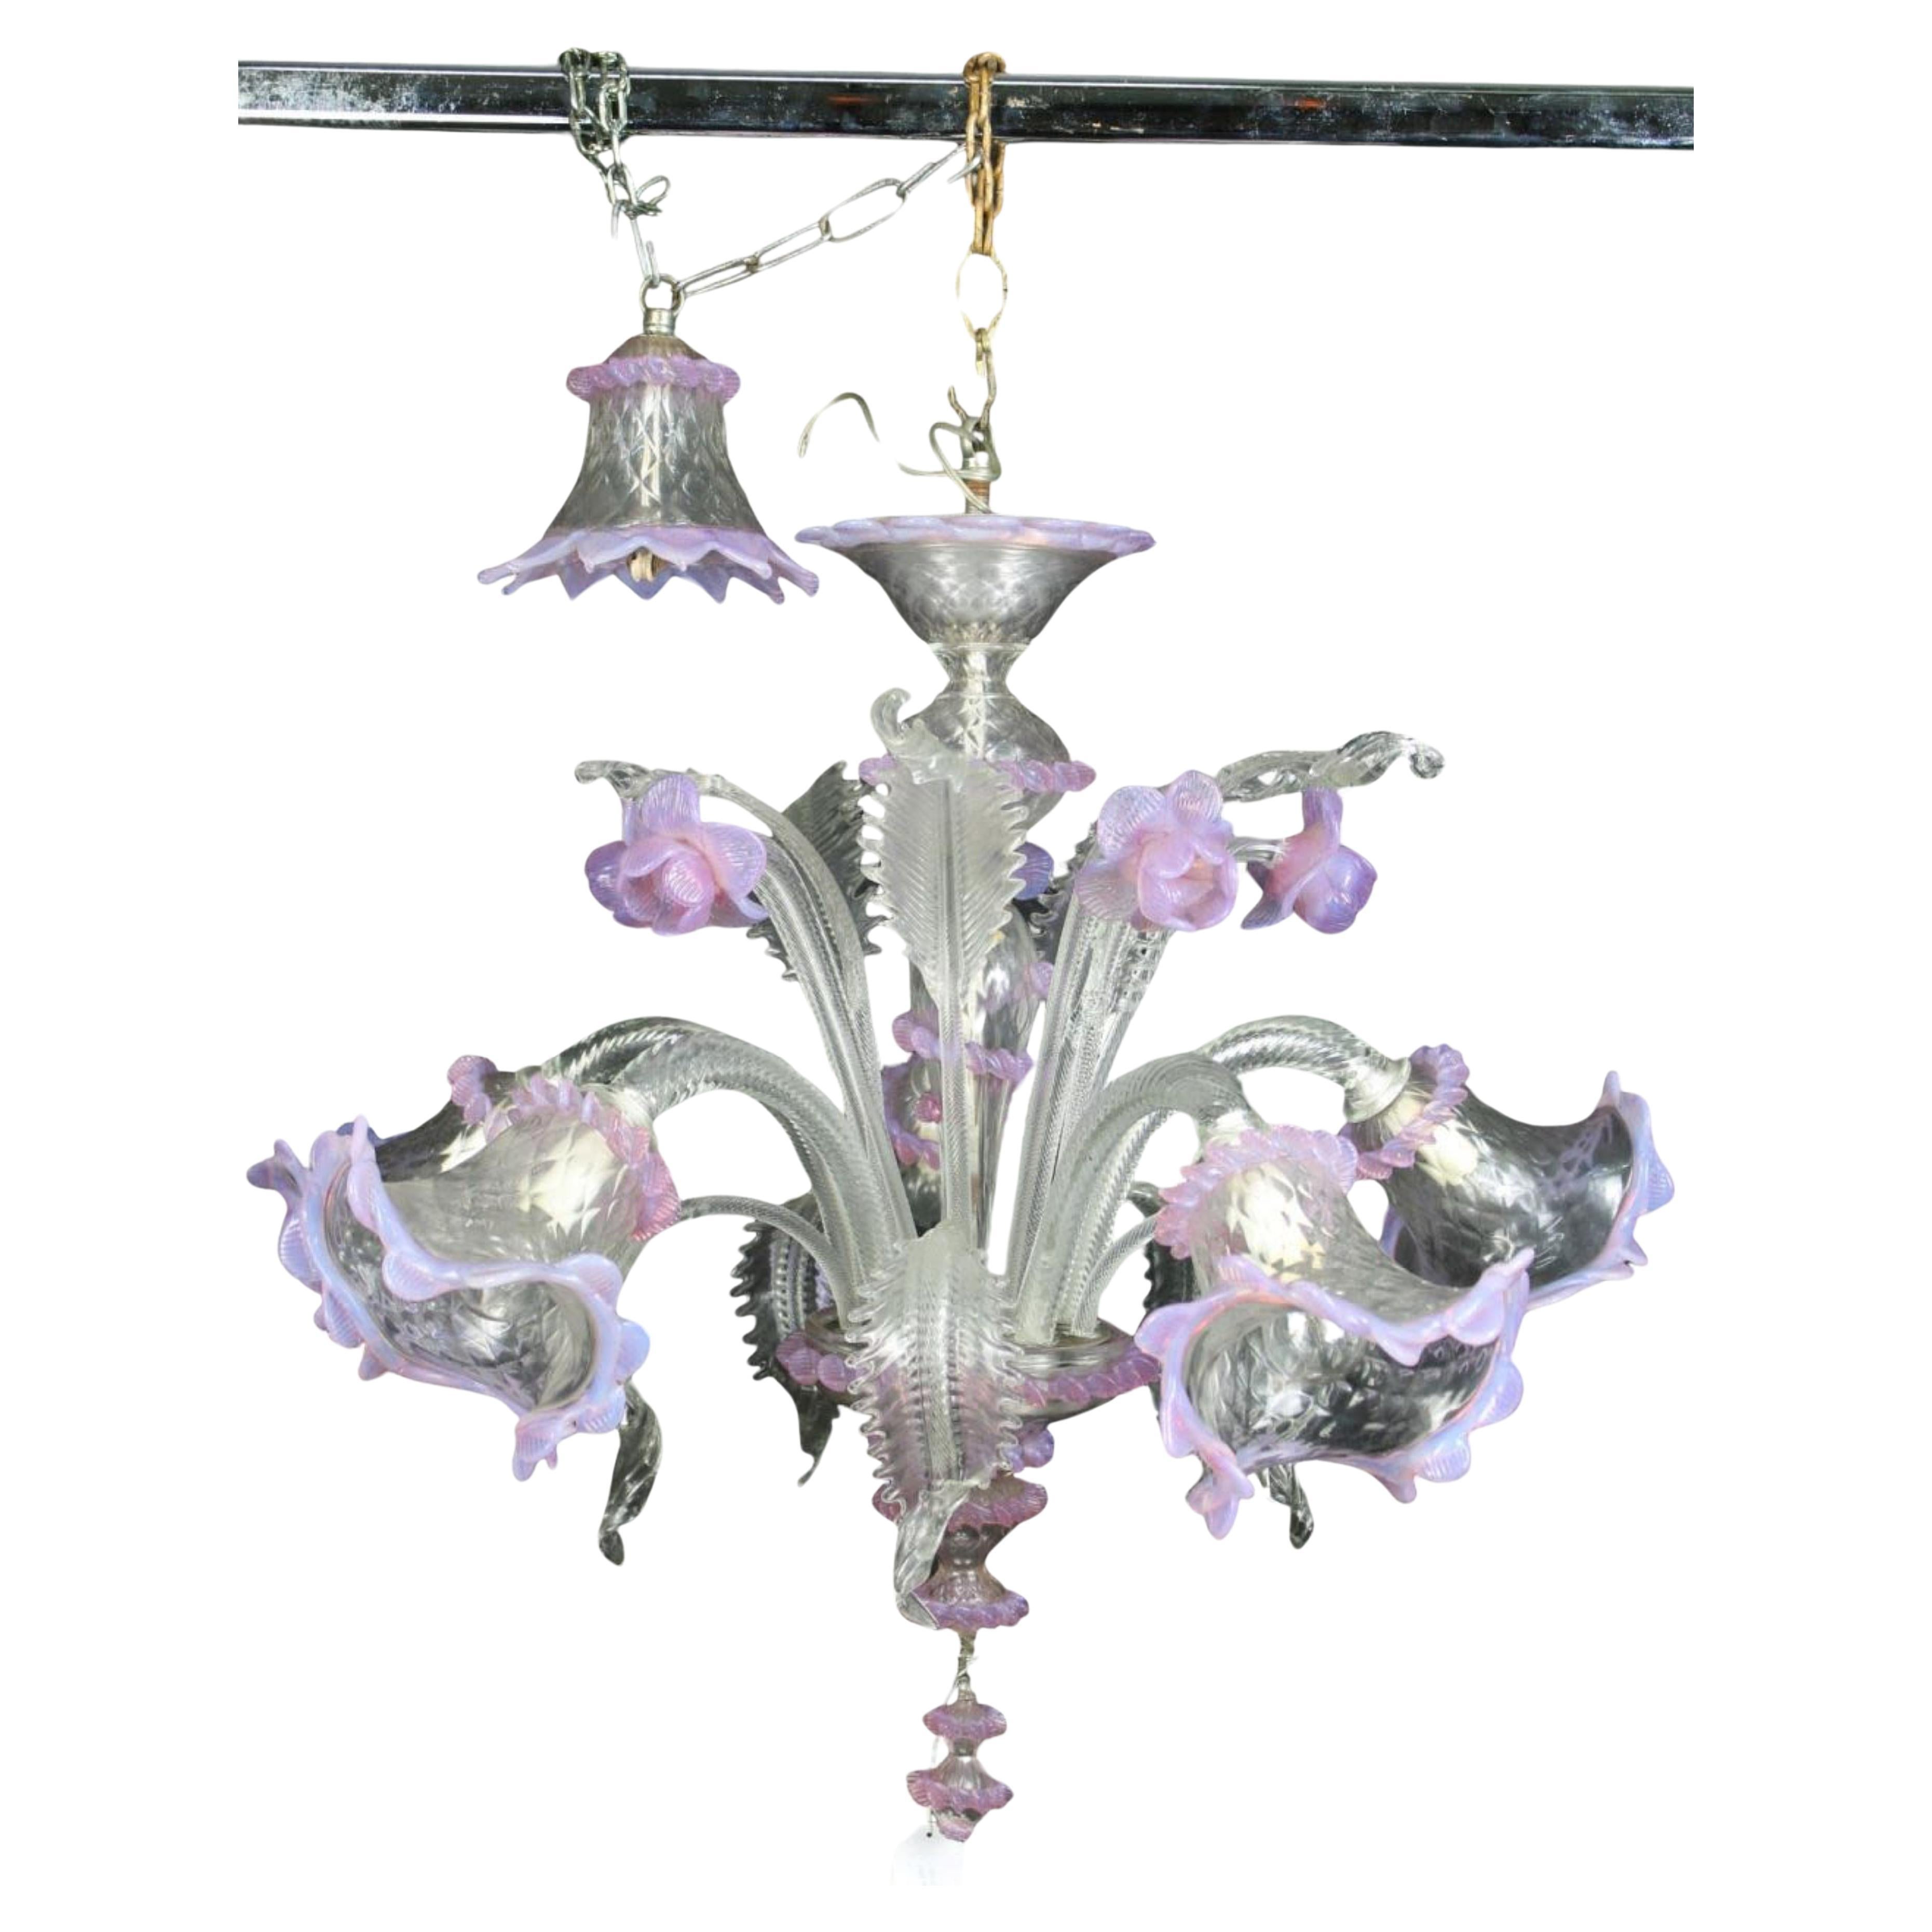 5 ARMS CHANDELIER in Murano glass Venice Early 20th Century